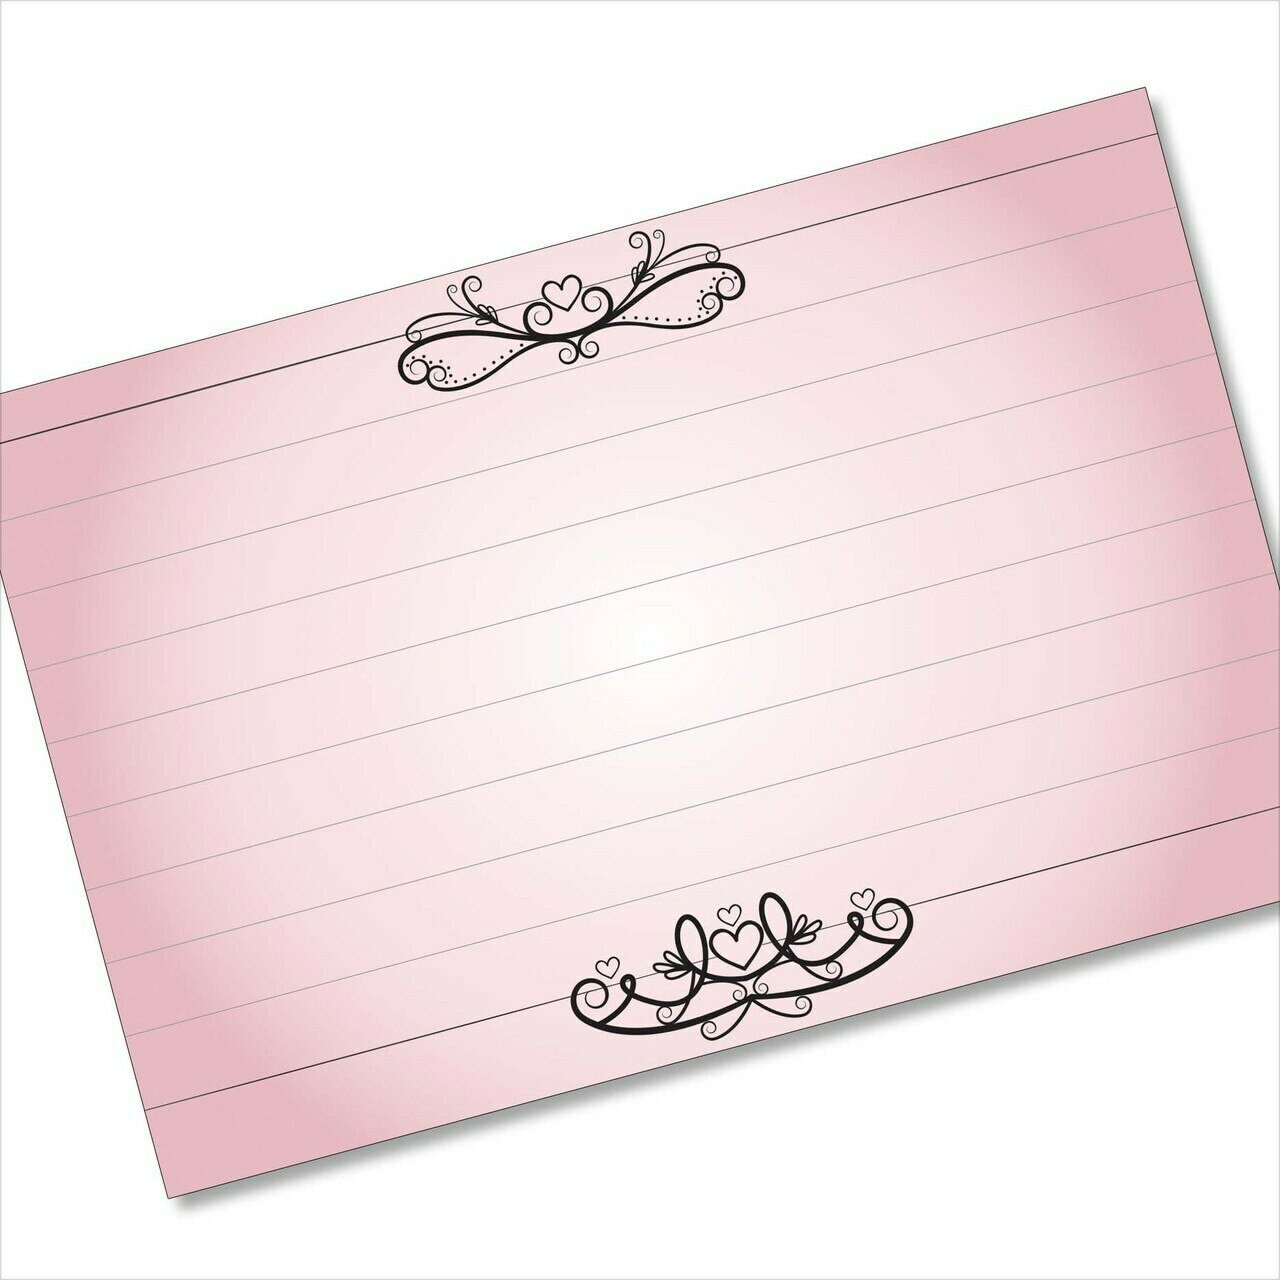 Love note or leave Blank, 4x6 or 5x7 Picture Options